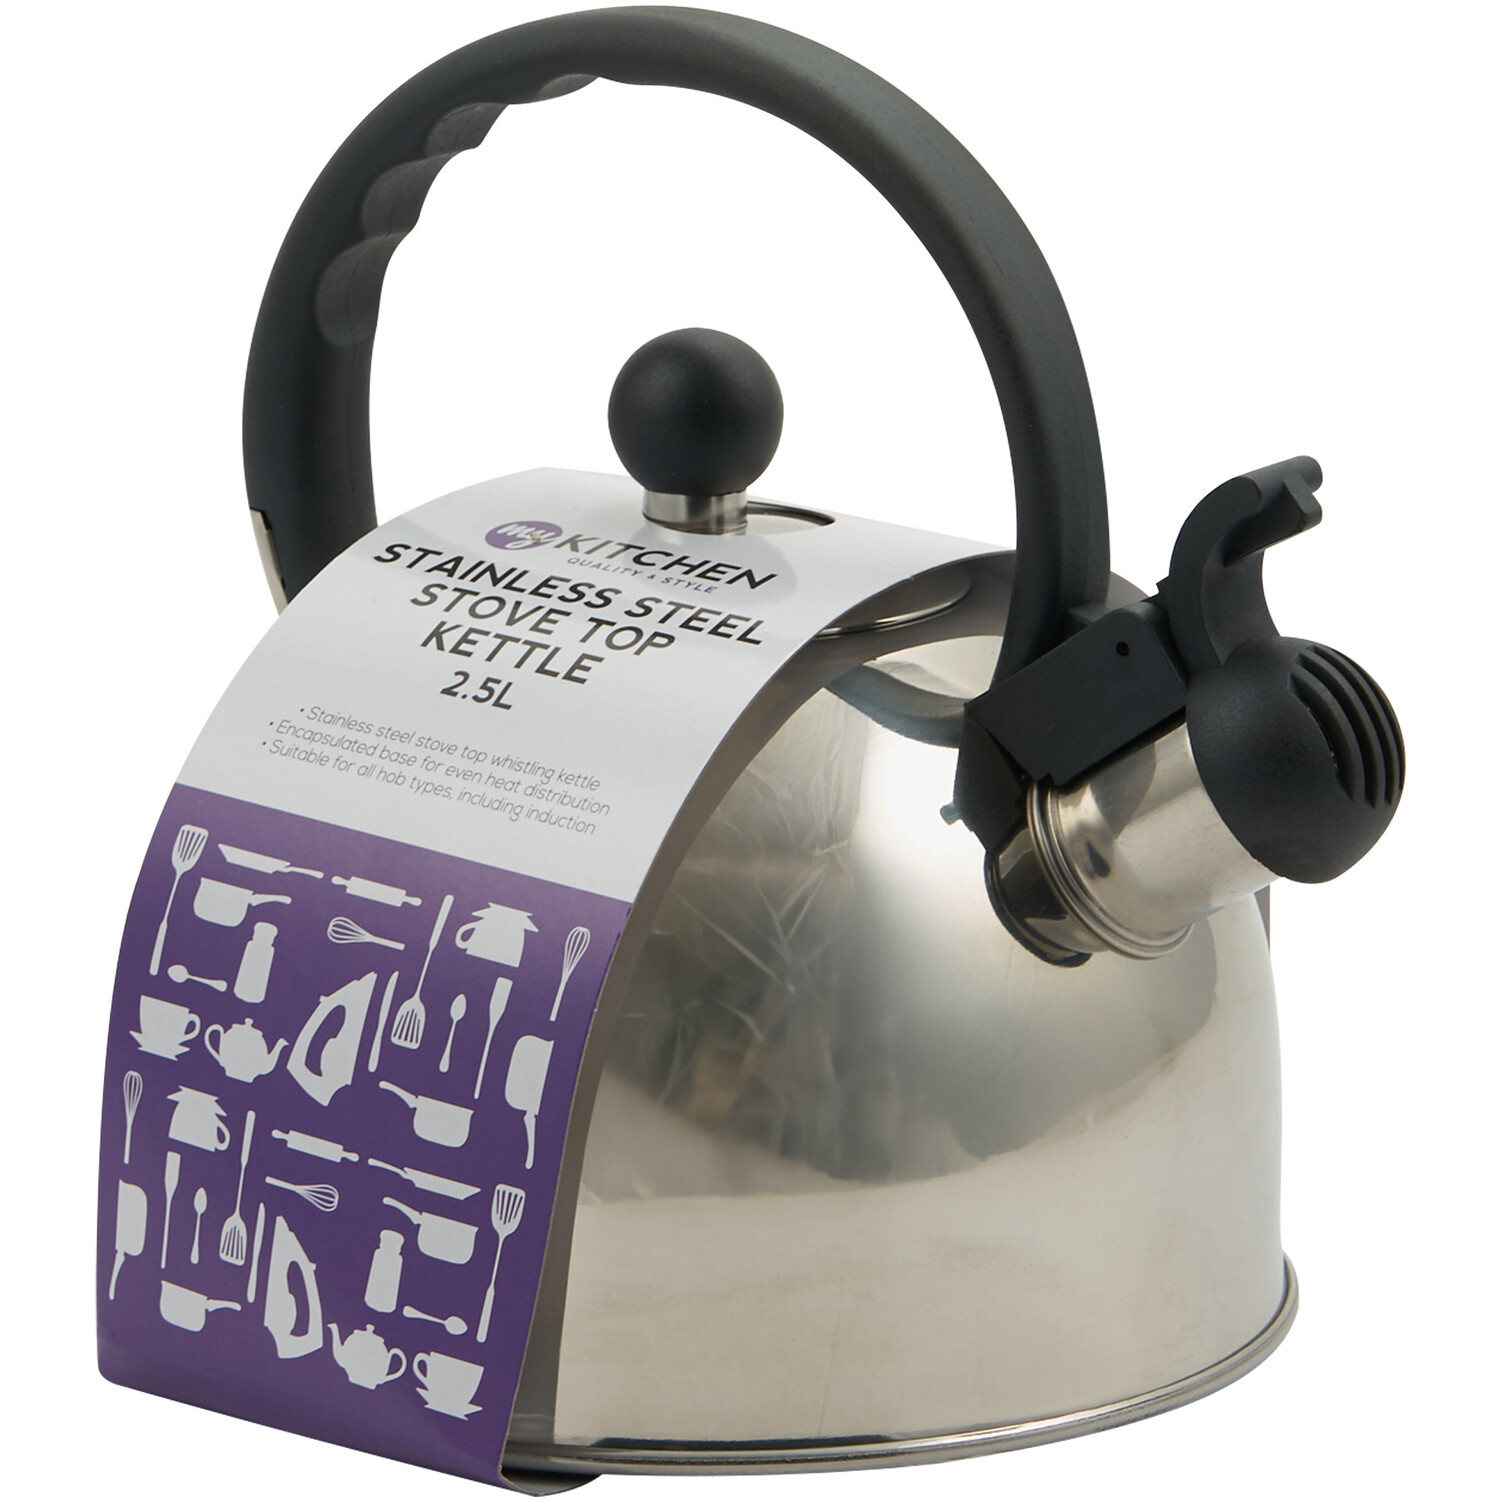 Stainless Steel 2.5L Stove Top Kettle - Chrome Image 2